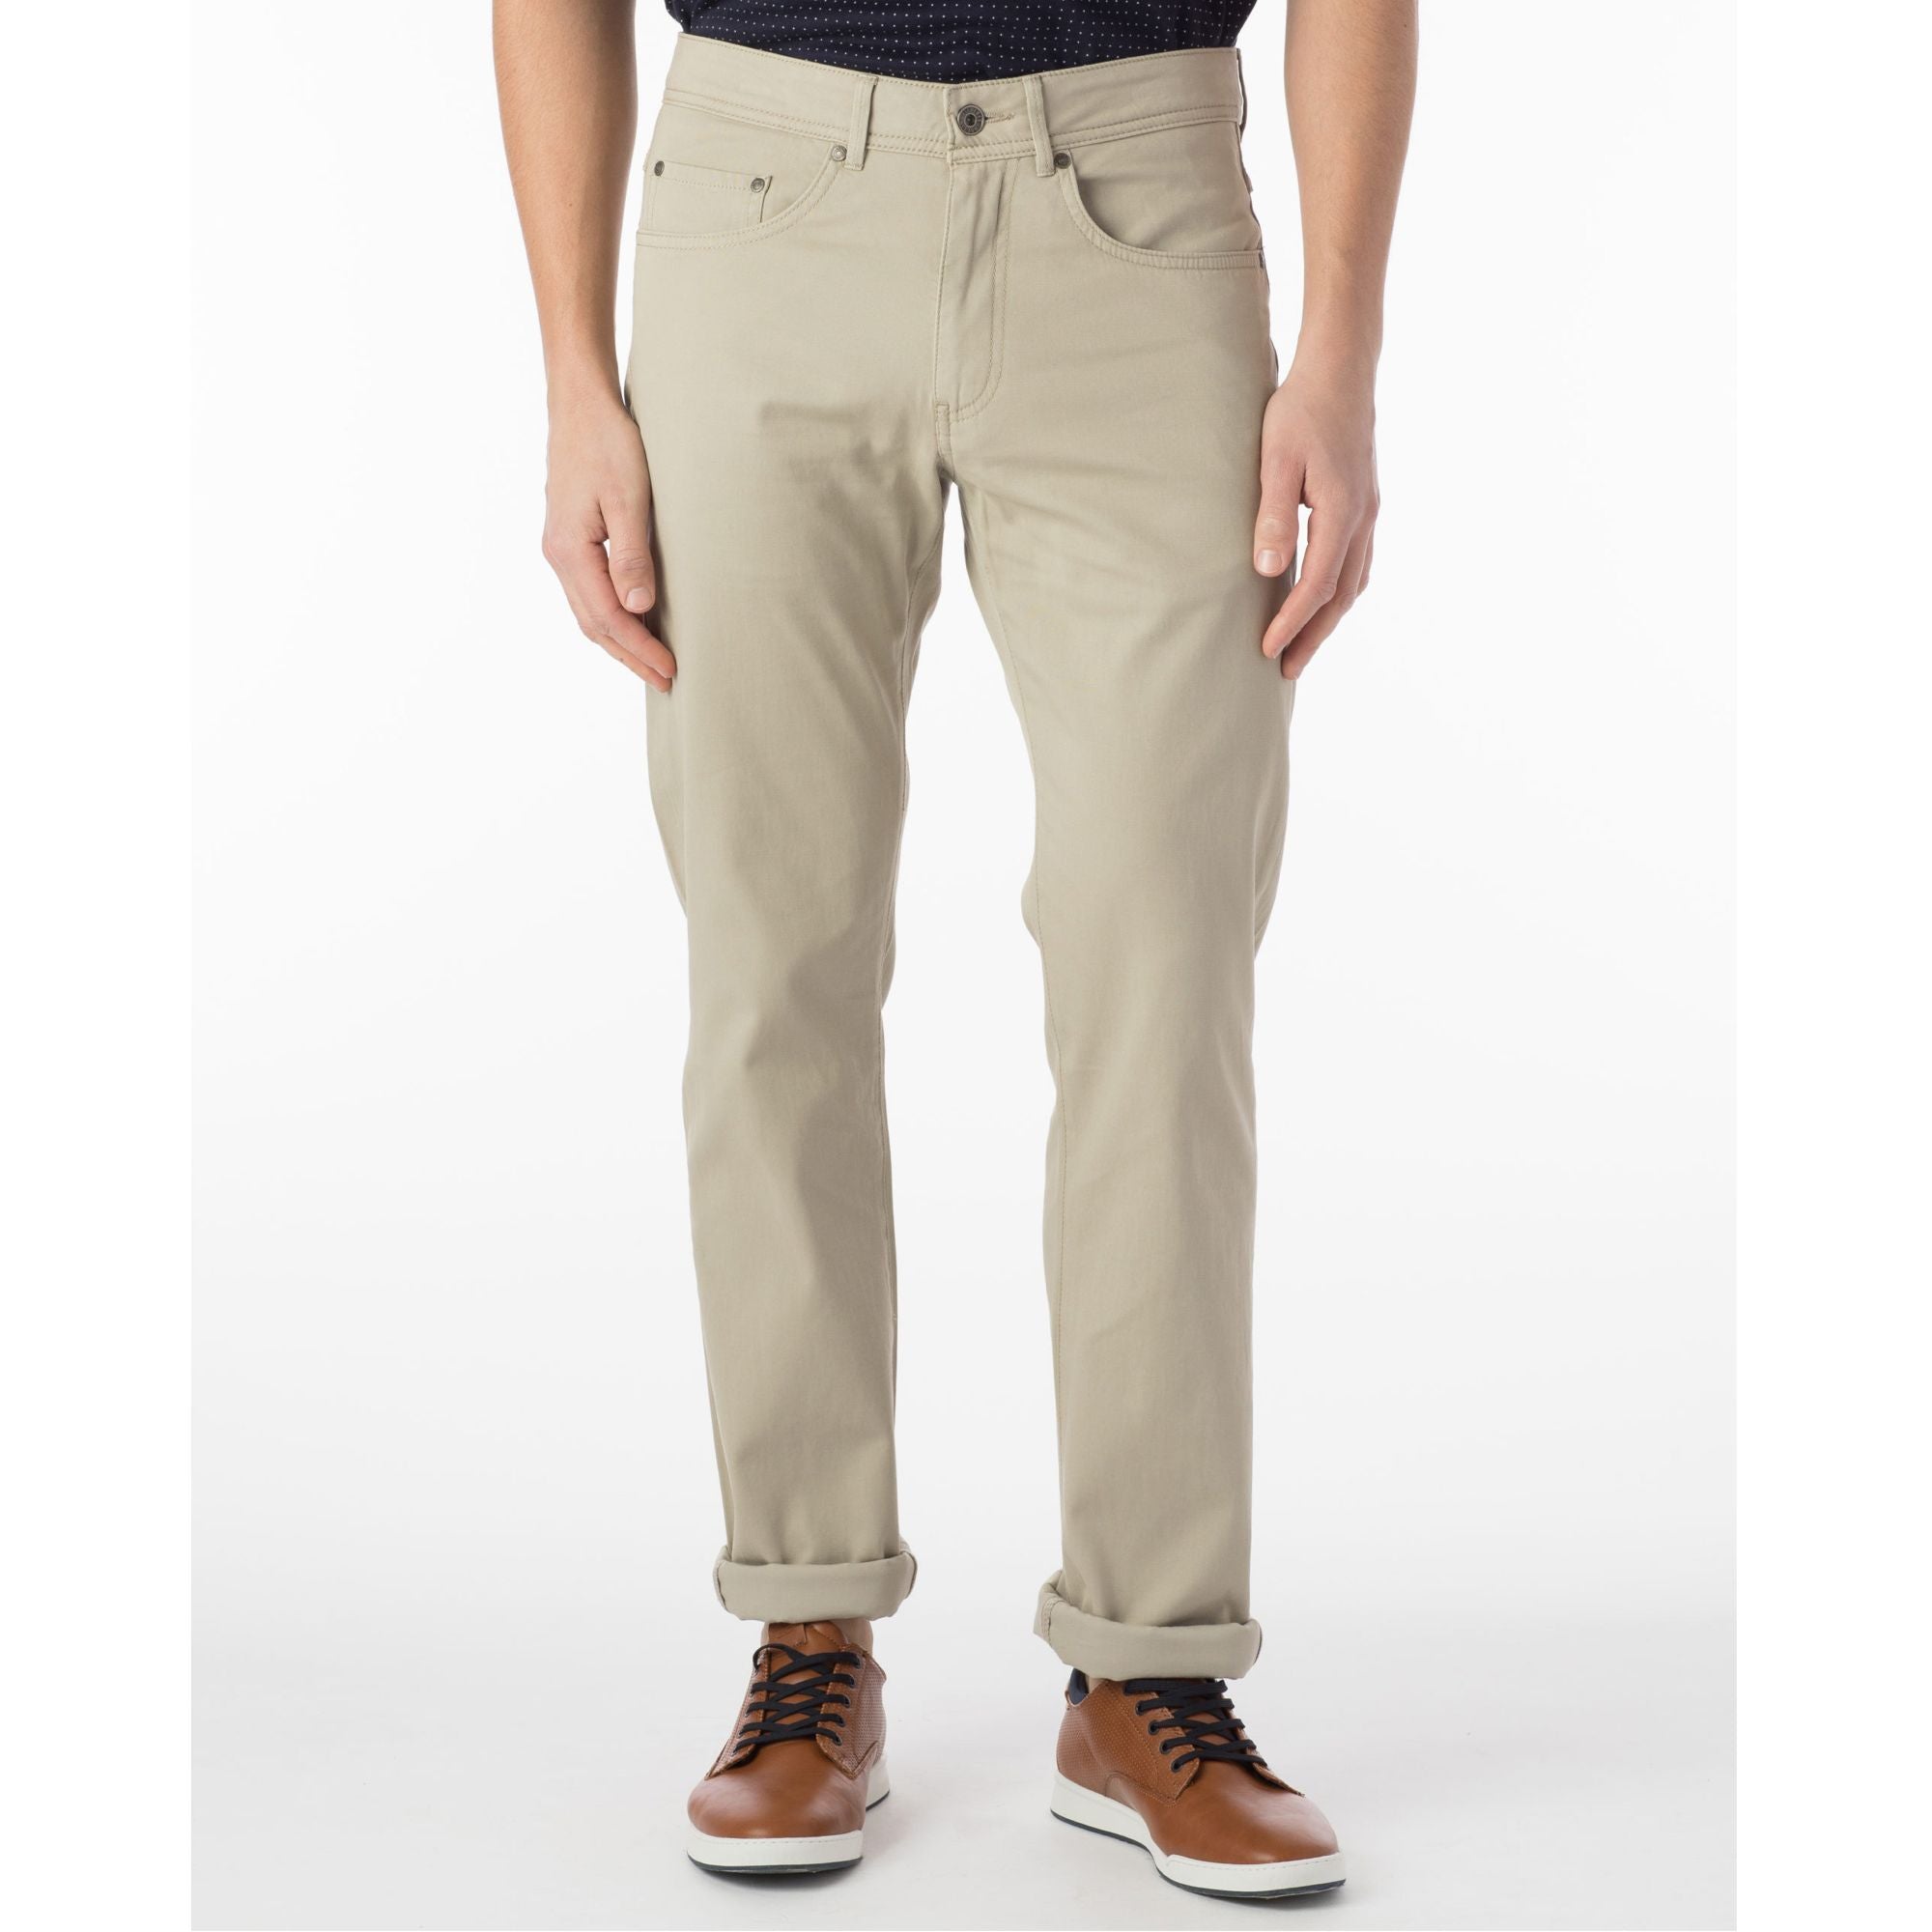 Perma Color Pima Twill 5-Pocket Pants in Stone (Size 31) (Crescent Modern Fit) by Ballin